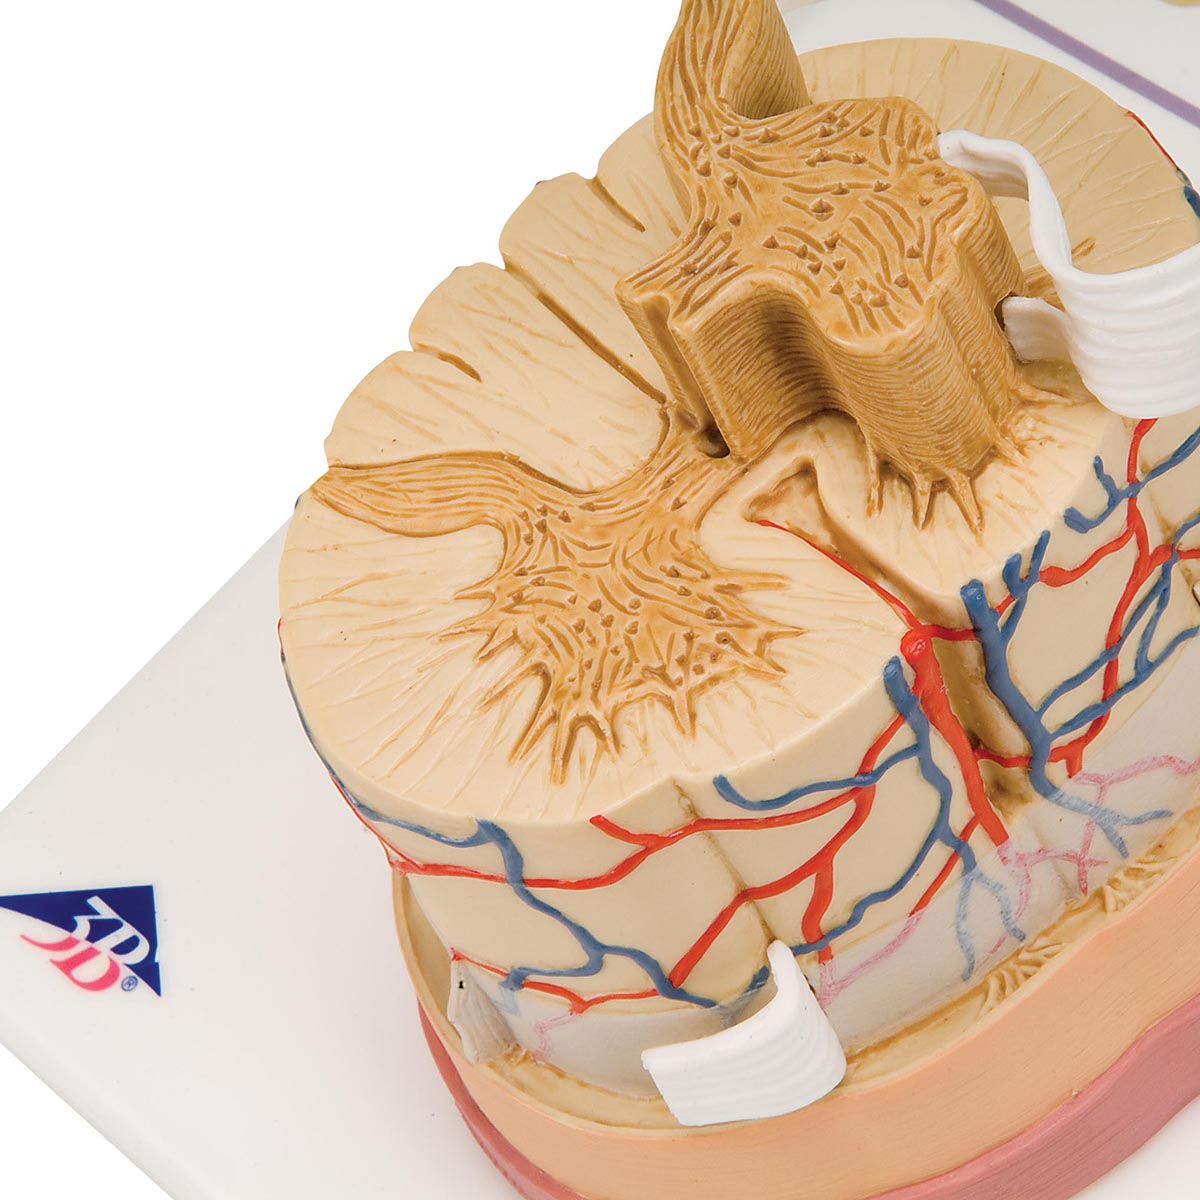 Enlarged model showing a cross-section of the spinal cord incl. the meninges, blood vessels and a spinal nerve